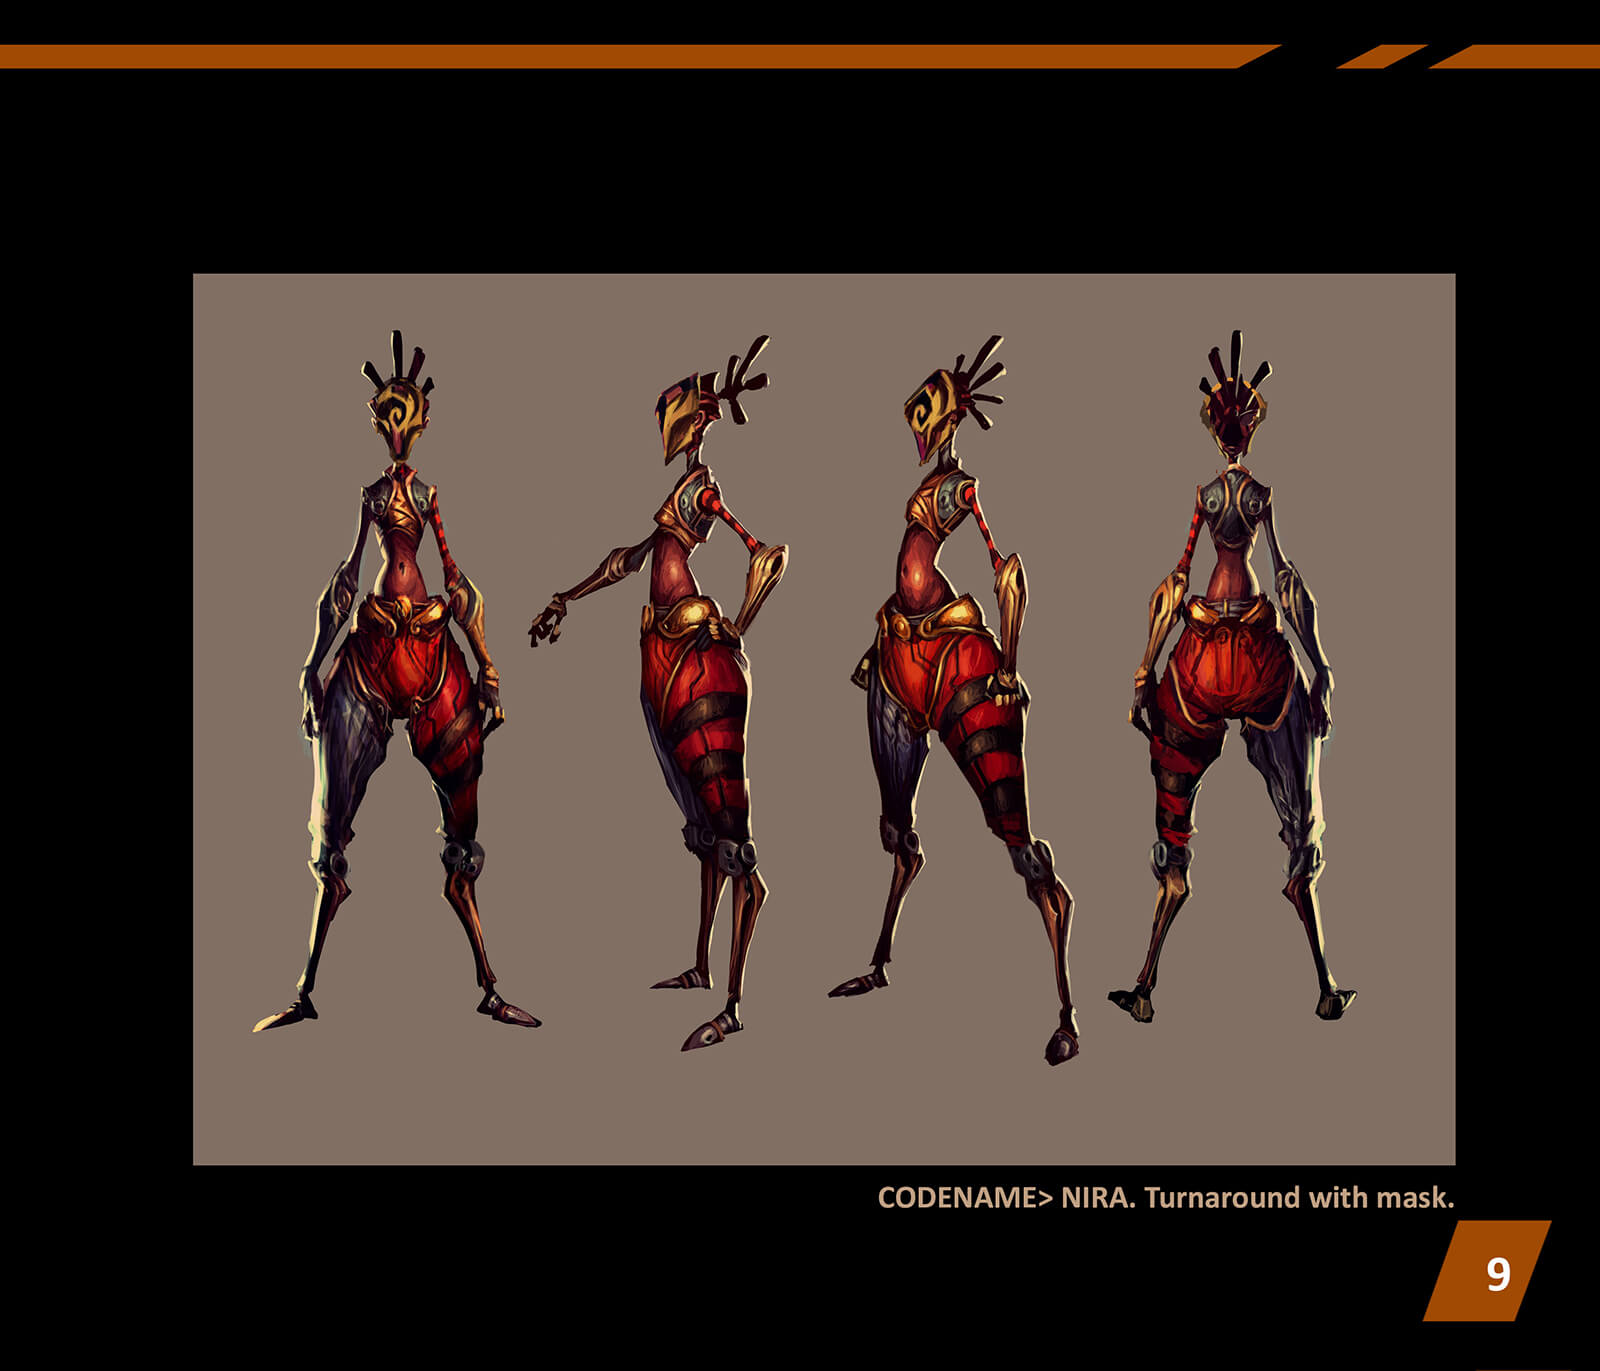 Character design turnaround of an abstractly proportioned woman standing in ornate red and black battle gear and face mask